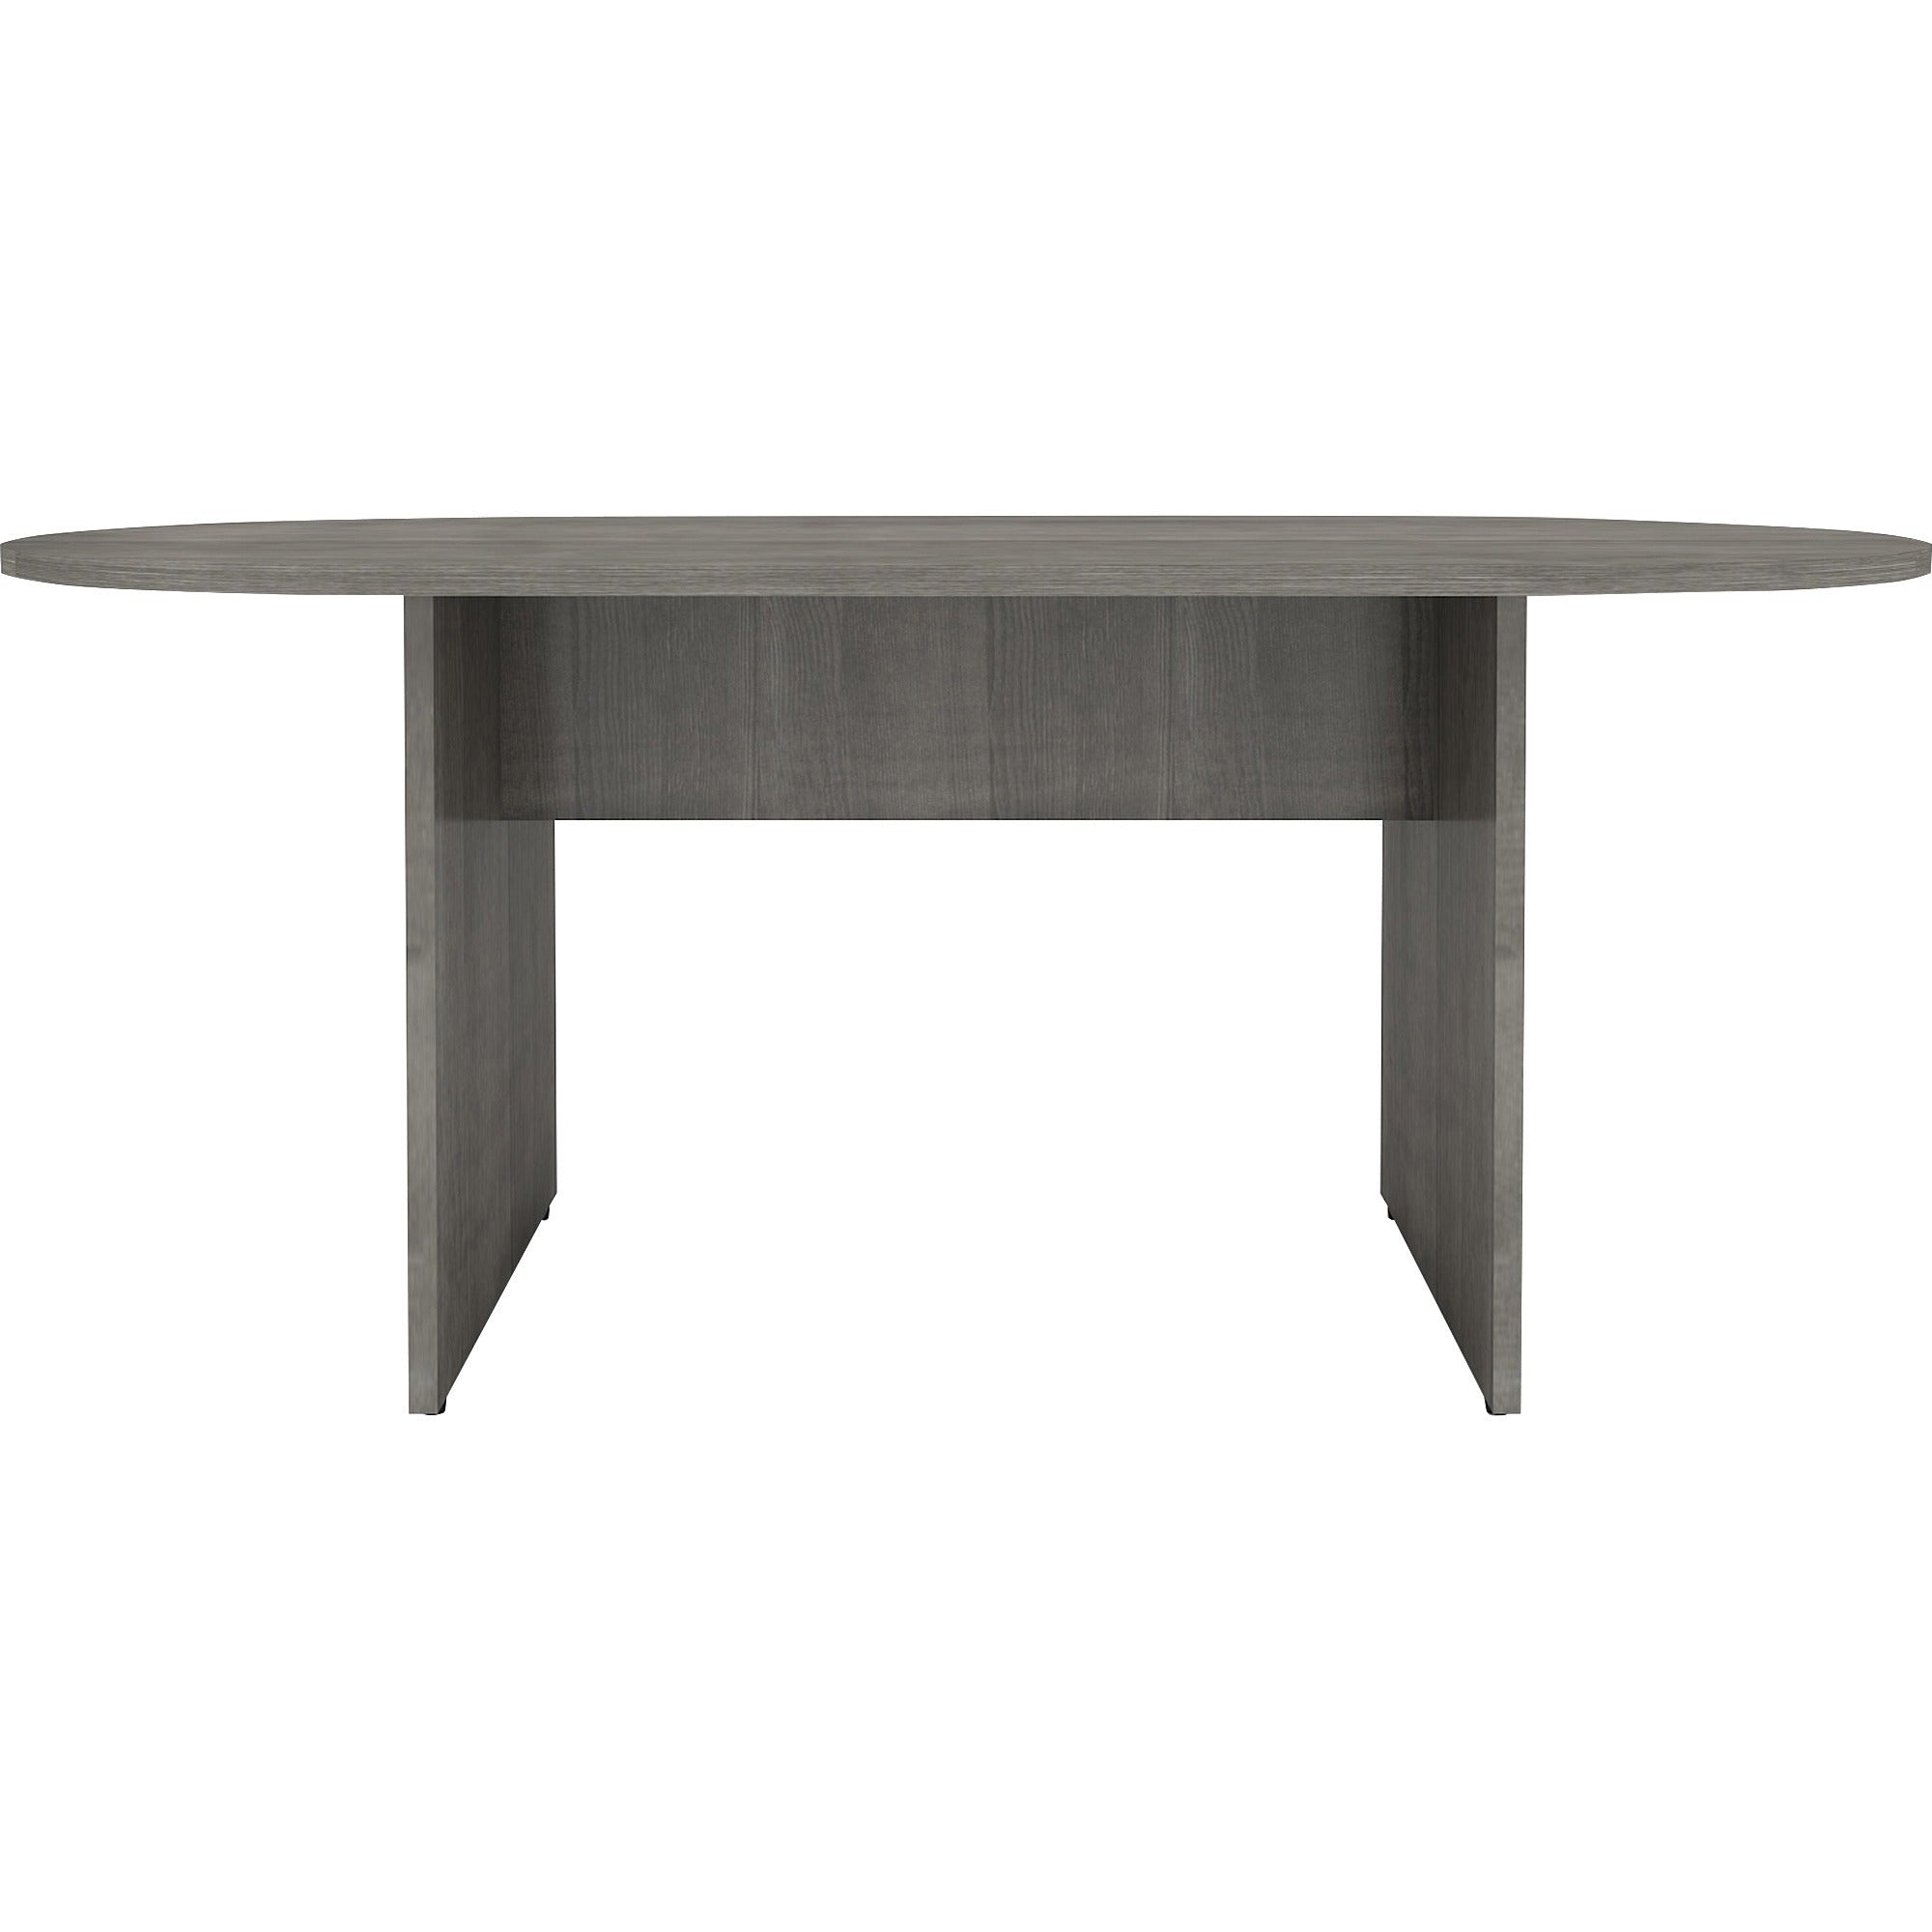 lorell-essentials-oval-conference-table-13-top-0-edge-72-x-29536-finish-weathered-charcoal-laminate_llr69569 - 2